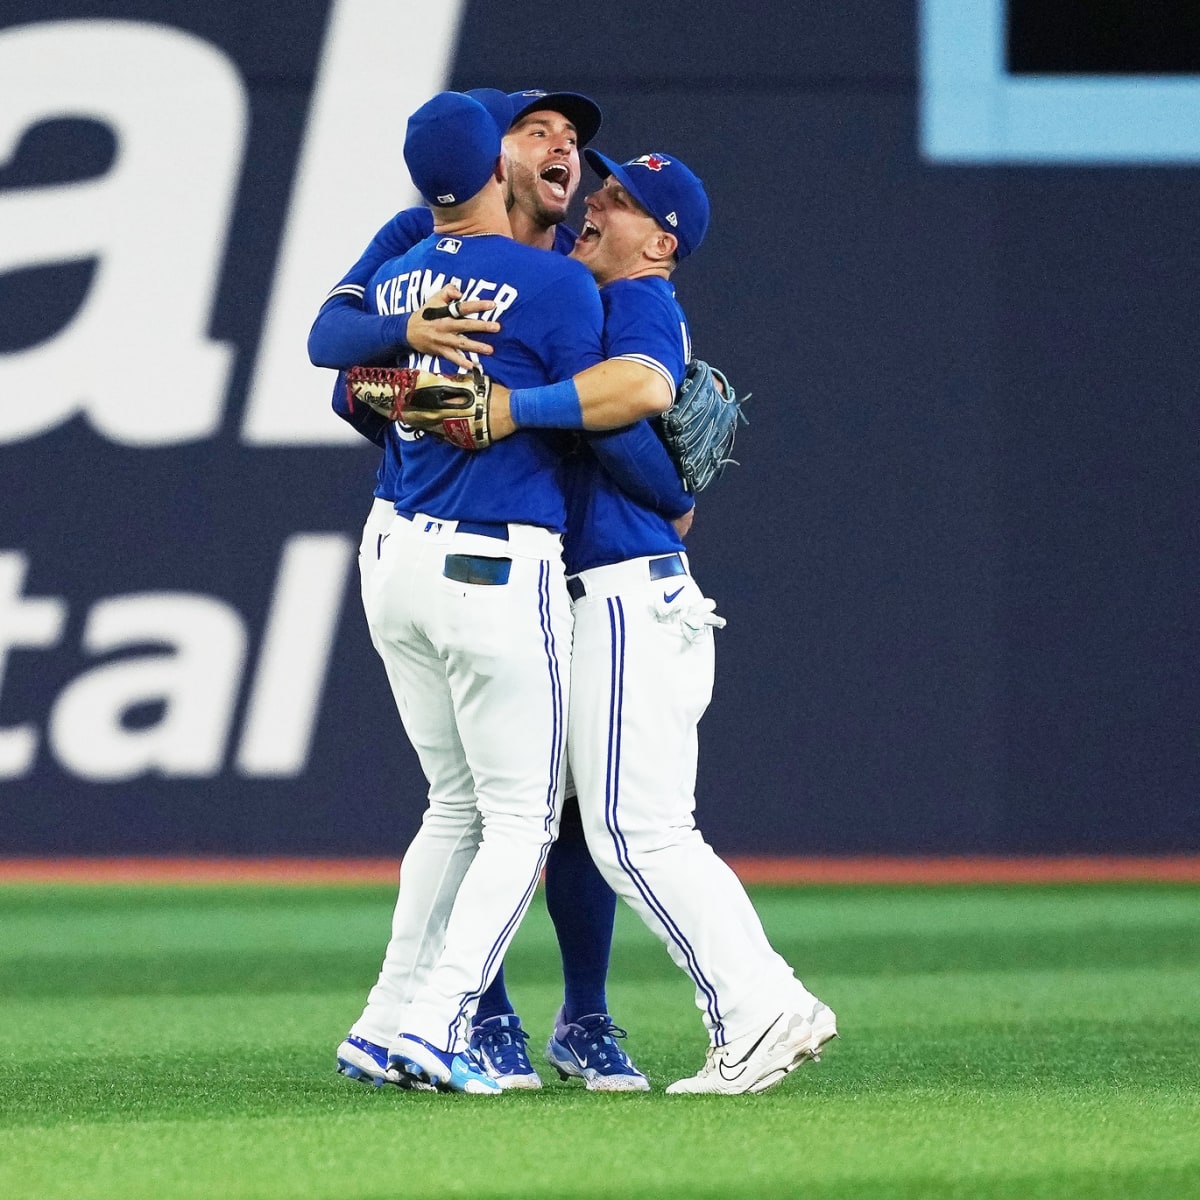 Blue Jays fall to Mariners for 2nd straight loss